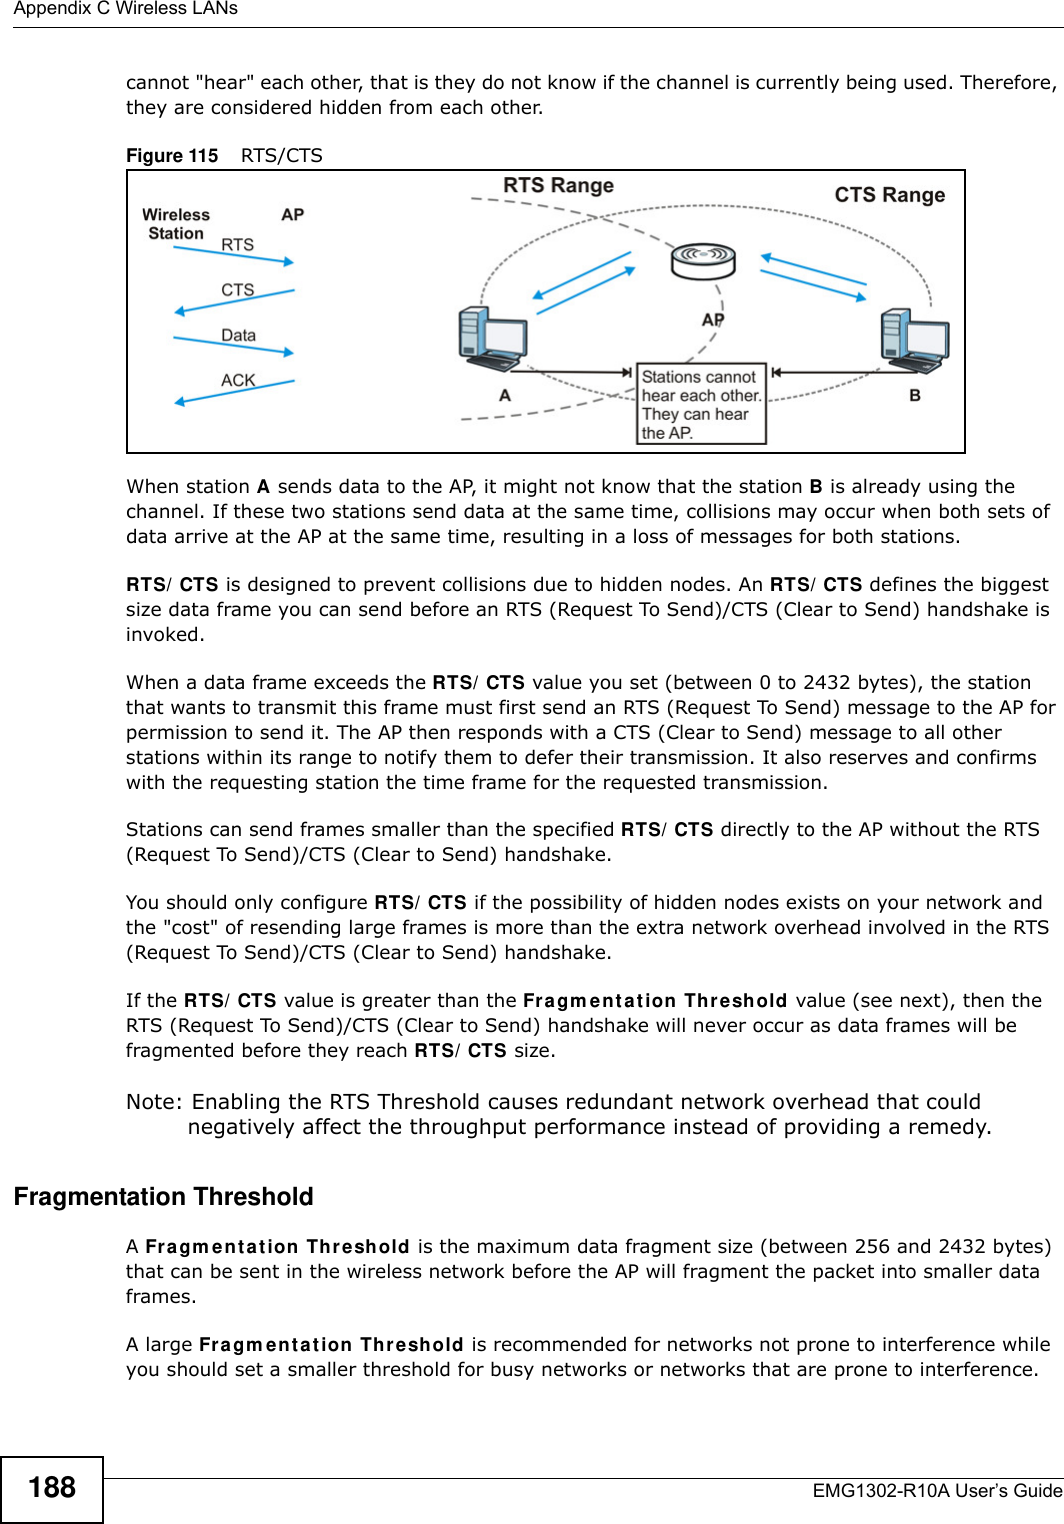 Appendix C Wireless LANsEMG1302-R10A User’s Guide188cannot &quot;hear&quot; each other, that is they do not know if the channel is currently being used. Therefore, they are considered hidden from each other. Figure 115    RTS/CTSWhen station A sends data to the AP, it might not know that the station B is already using the channel. If these two stations send data at the same time, collisions may occur when both sets of data arrive at the AP at the same time, resulting in a loss of messages for both stations.RTS/ CTS is designed to prevent collisions due to hidden nodes. An RTS/ CTS defines the biggest size data frame you can send before an RTS (Request To Send)/CTS (Clear to Send) handshake is invoked.When a data frame exceeds the RTS/ CTS value you set (between 0 to 2432 bytes), the station that wants to transmit this frame must first send an RTS (Request To Send) message to the AP for permission to send it. The AP then responds with a CTS (Clear to Send) message to all other stations within its range to notify them to defer their transmission. It also reserves and confirms with the requesting station the time frame for the requested transmission.Stations can send frames smaller than the specified RTS/ CTS directly to the AP without the RTS (Request To Send)/CTS (Clear to Send) handshake. You should only configure RTS/ CTS if the possibility of hidden nodes exists on your network and the &quot;cost&quot; of resending large frames is more than the extra network overhead involved in the RTS (Request To Send)/CTS (Clear to Send) handshake. If the RTS/ CTS value is greater than the Fragm e n t a t ion Threshold value (see next), then the RTS (Request To Send)/CTS (Clear to Send) handshake will never occur as data frames will be fragmented before they reach RTS/ CTS size. Note: Enabling the RTS Threshold causes redundant network overhead that could negatively affect the throughput performance instead of providing a remedy.Fragmentation ThresholdA Fragm ent at ion Th r e shold is the maximum data fragment size (between 256 and 2432 bytes) that can be sent in the wireless network before the AP will fragment the packet into smaller data frames.A large Fragm e nt a t ion Threshold is recommended for networks not prone to interference while you should set a smaller threshold for busy networks or networks that are prone to interference.